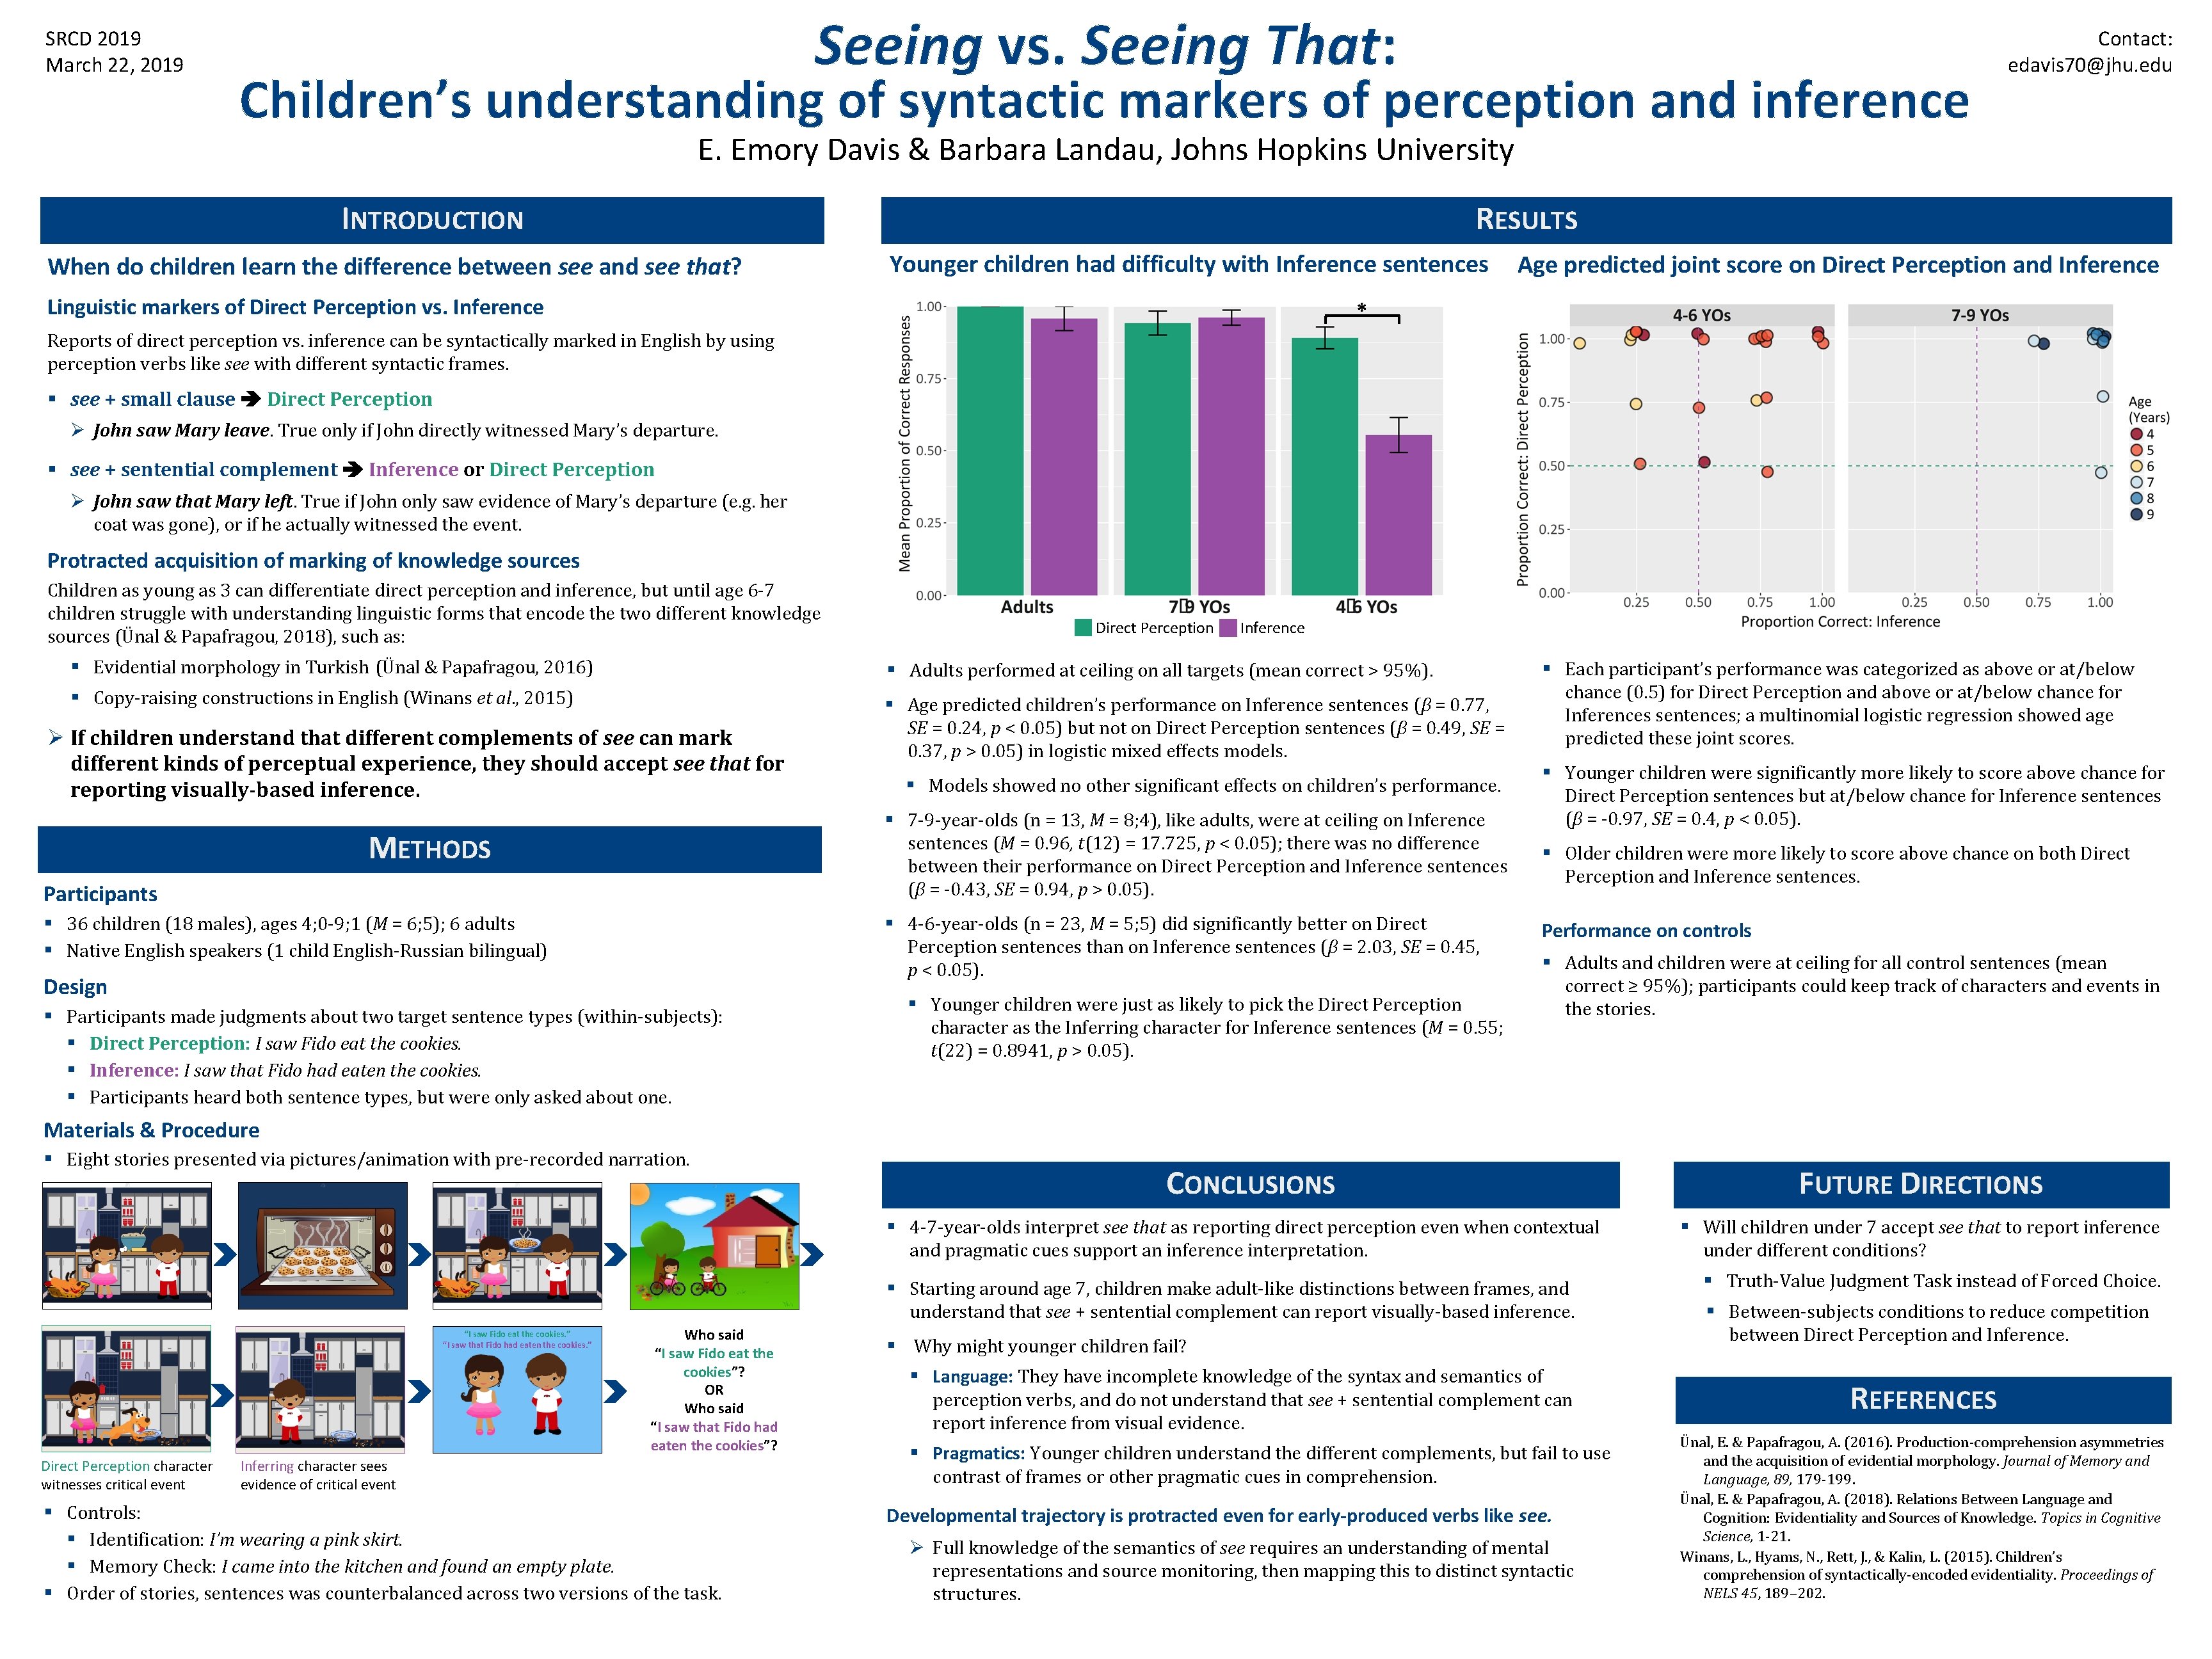 SRCD 2019 March 22, 2019 Seeing vs. Seeing That: Children’s understanding of syntactic markers